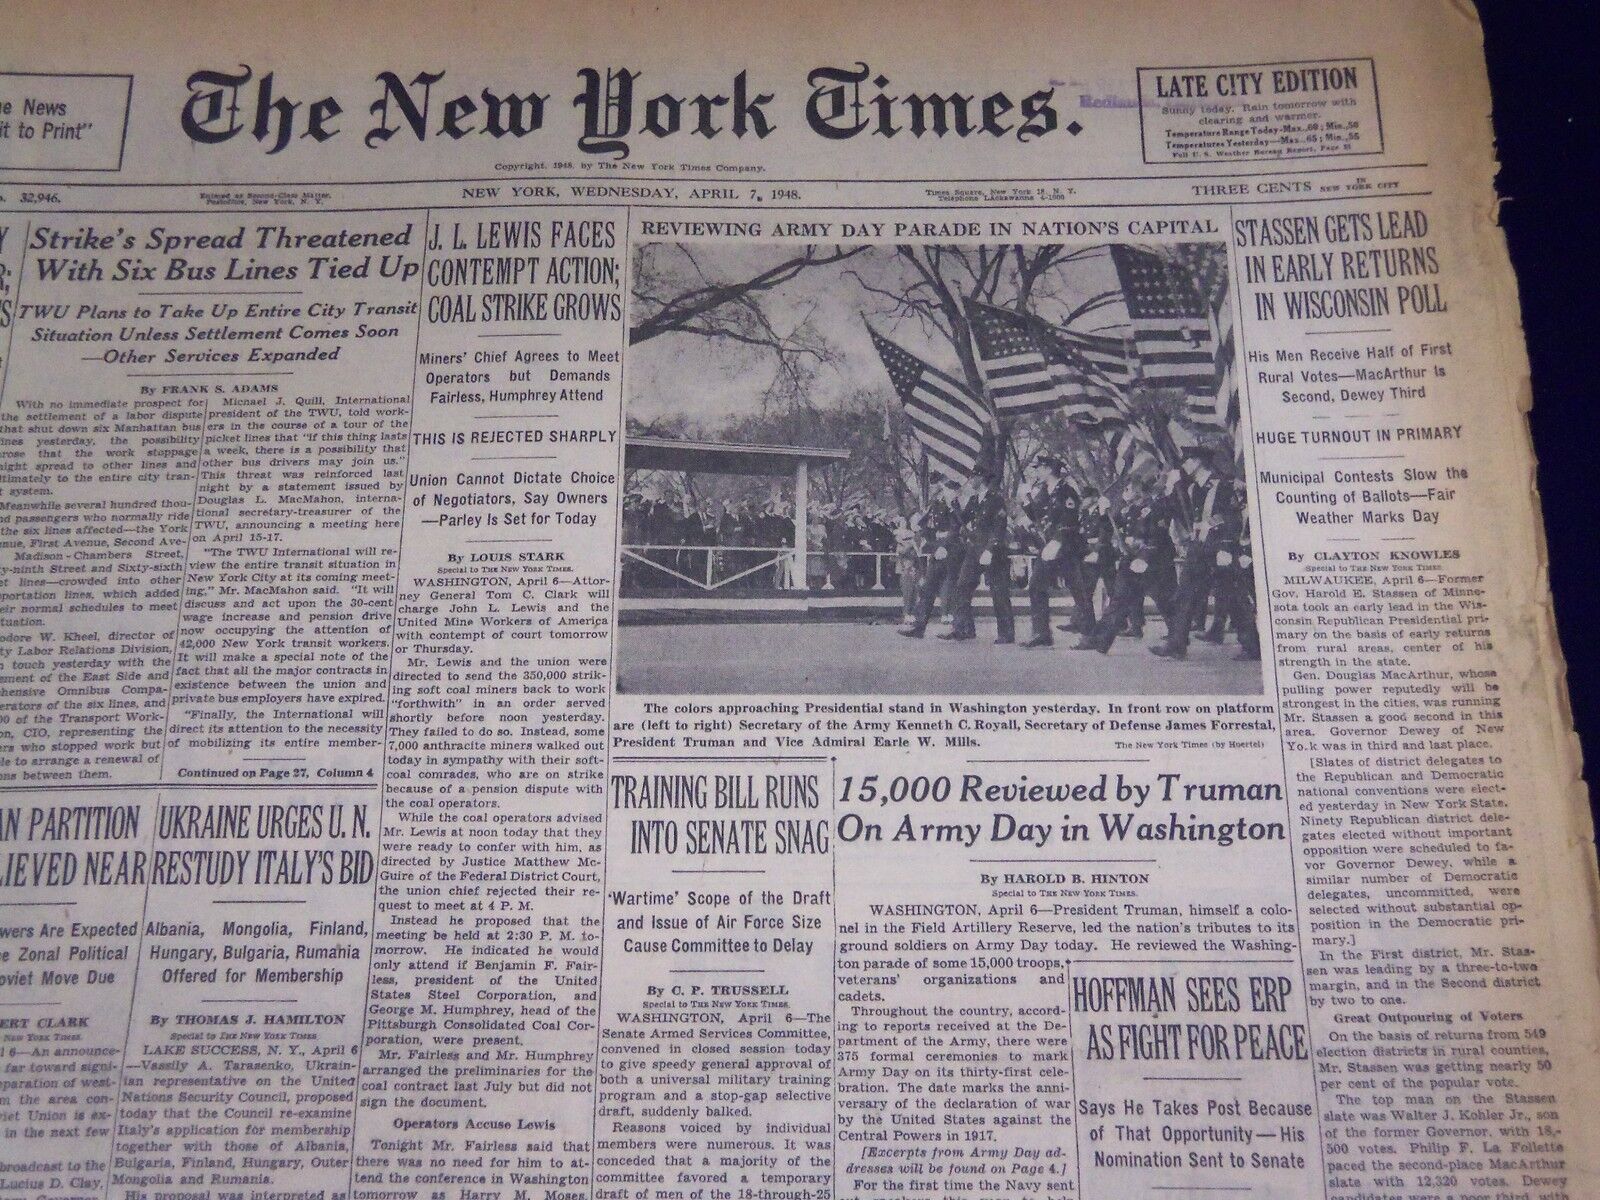 1948 APRIL 7 NEW YORK TIMES - STASSEN HAS LEAD IN WISCONSIN - NT 3539